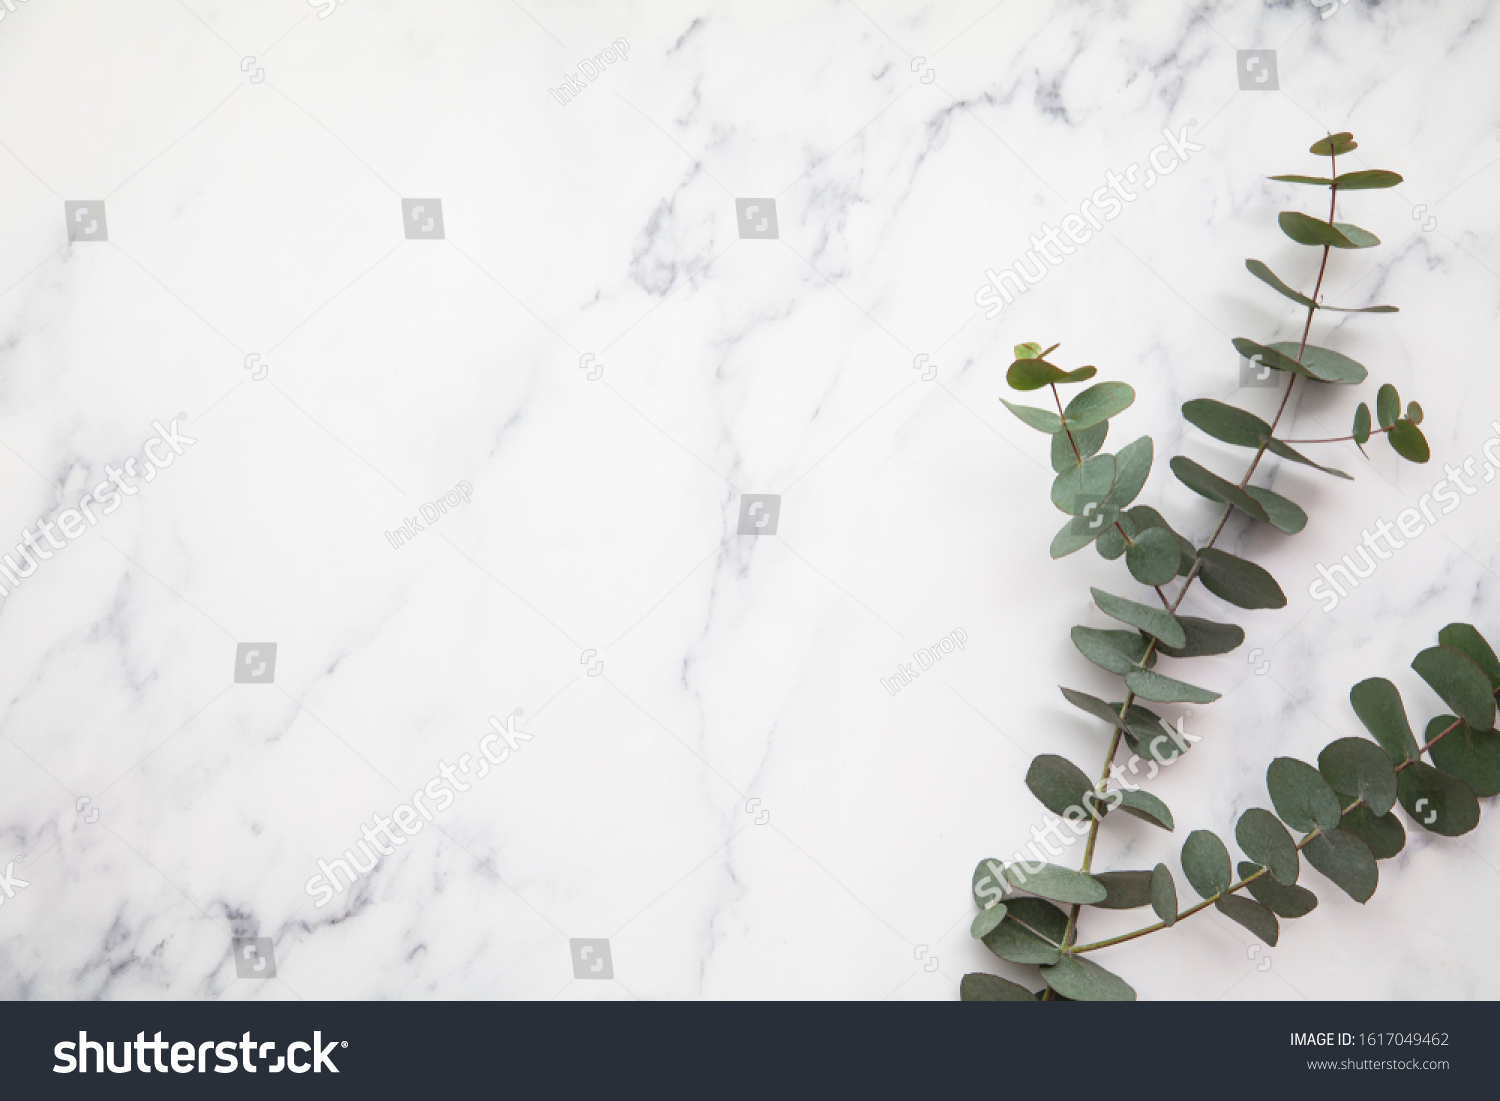 Branches of eucalyptus leaves on a marble background. Lay flat #1617049462